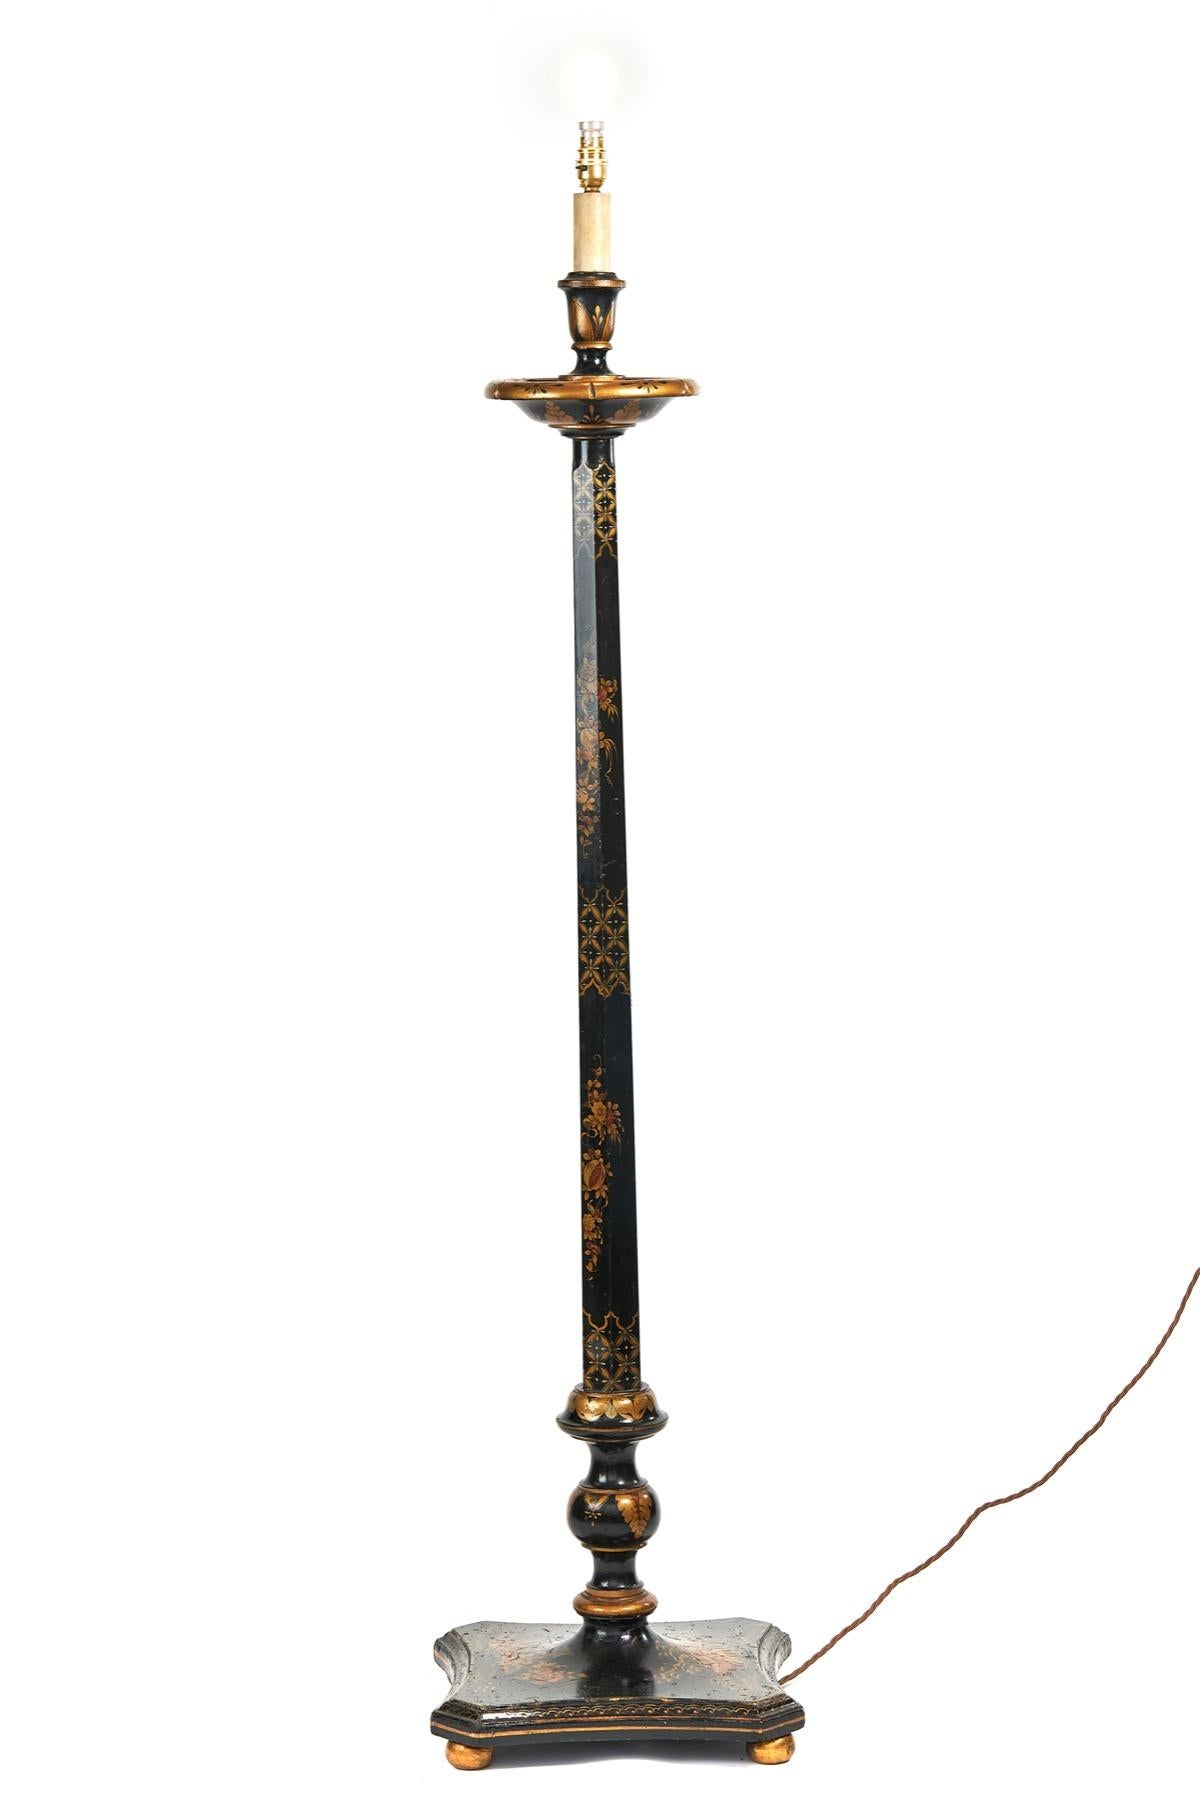 Lacquered Chinoiserie Decorated Standard Lamp circa 1930s [B] For Sale